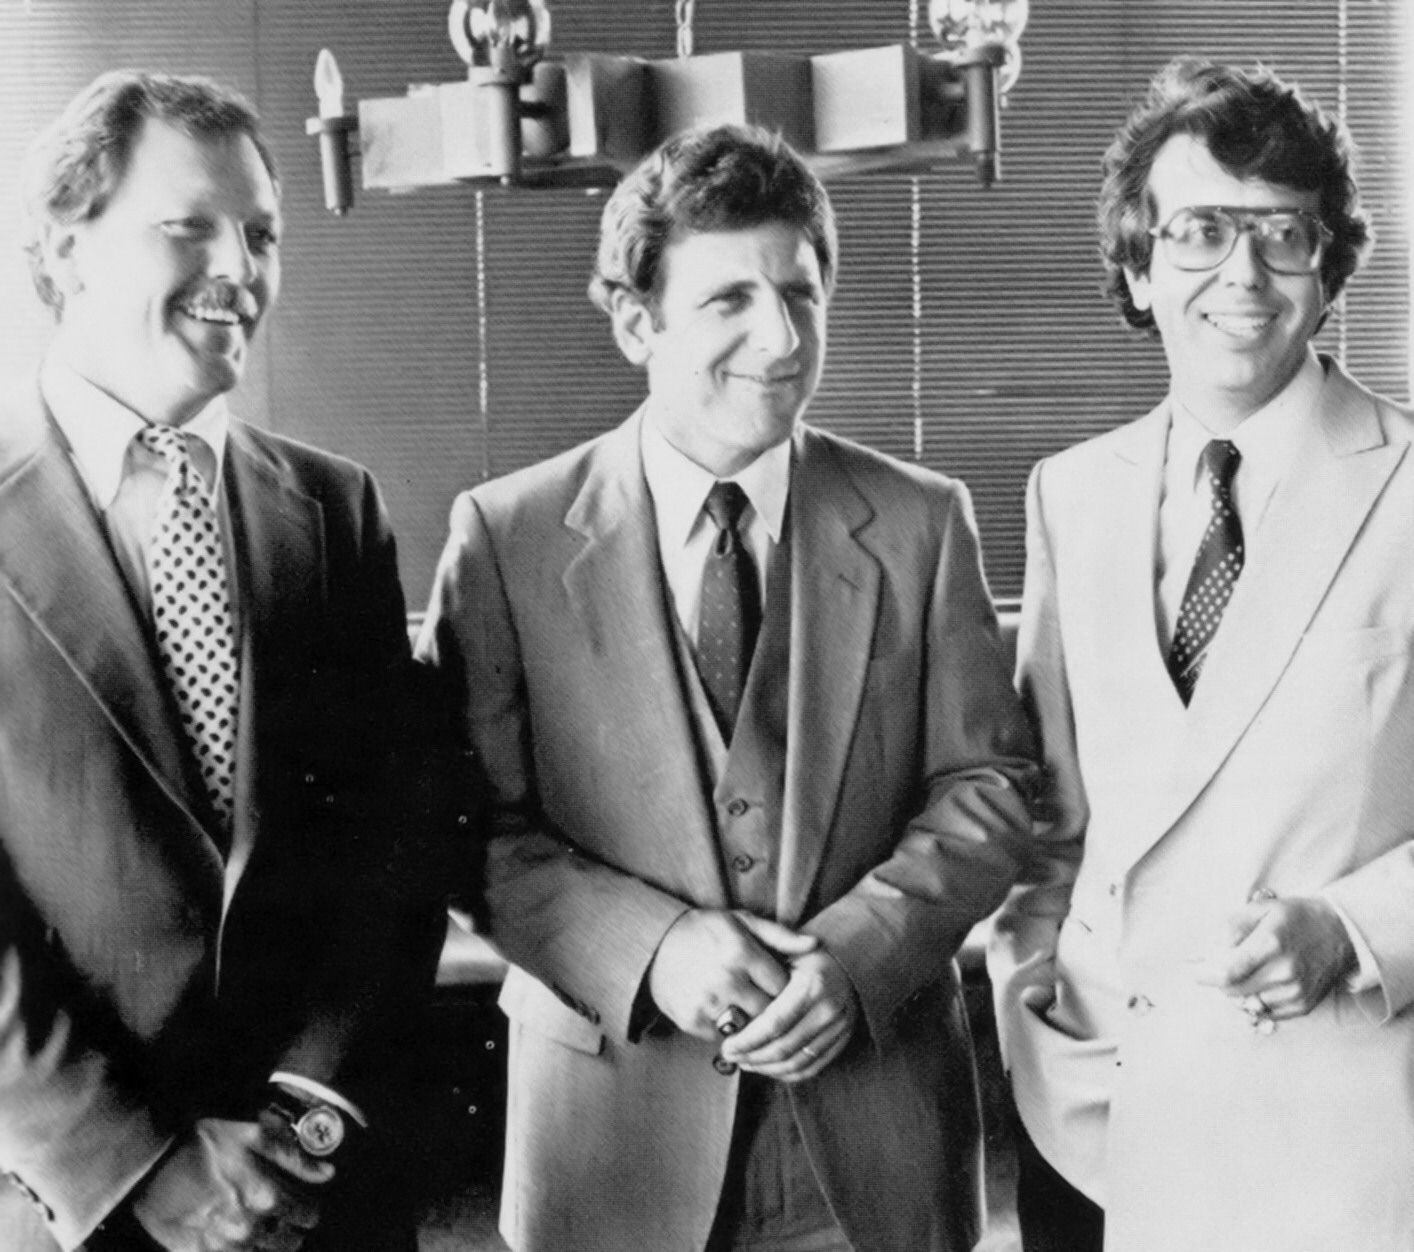 Coach Al Miller, Ted Moore and Francisco Marcos 1982.jpg